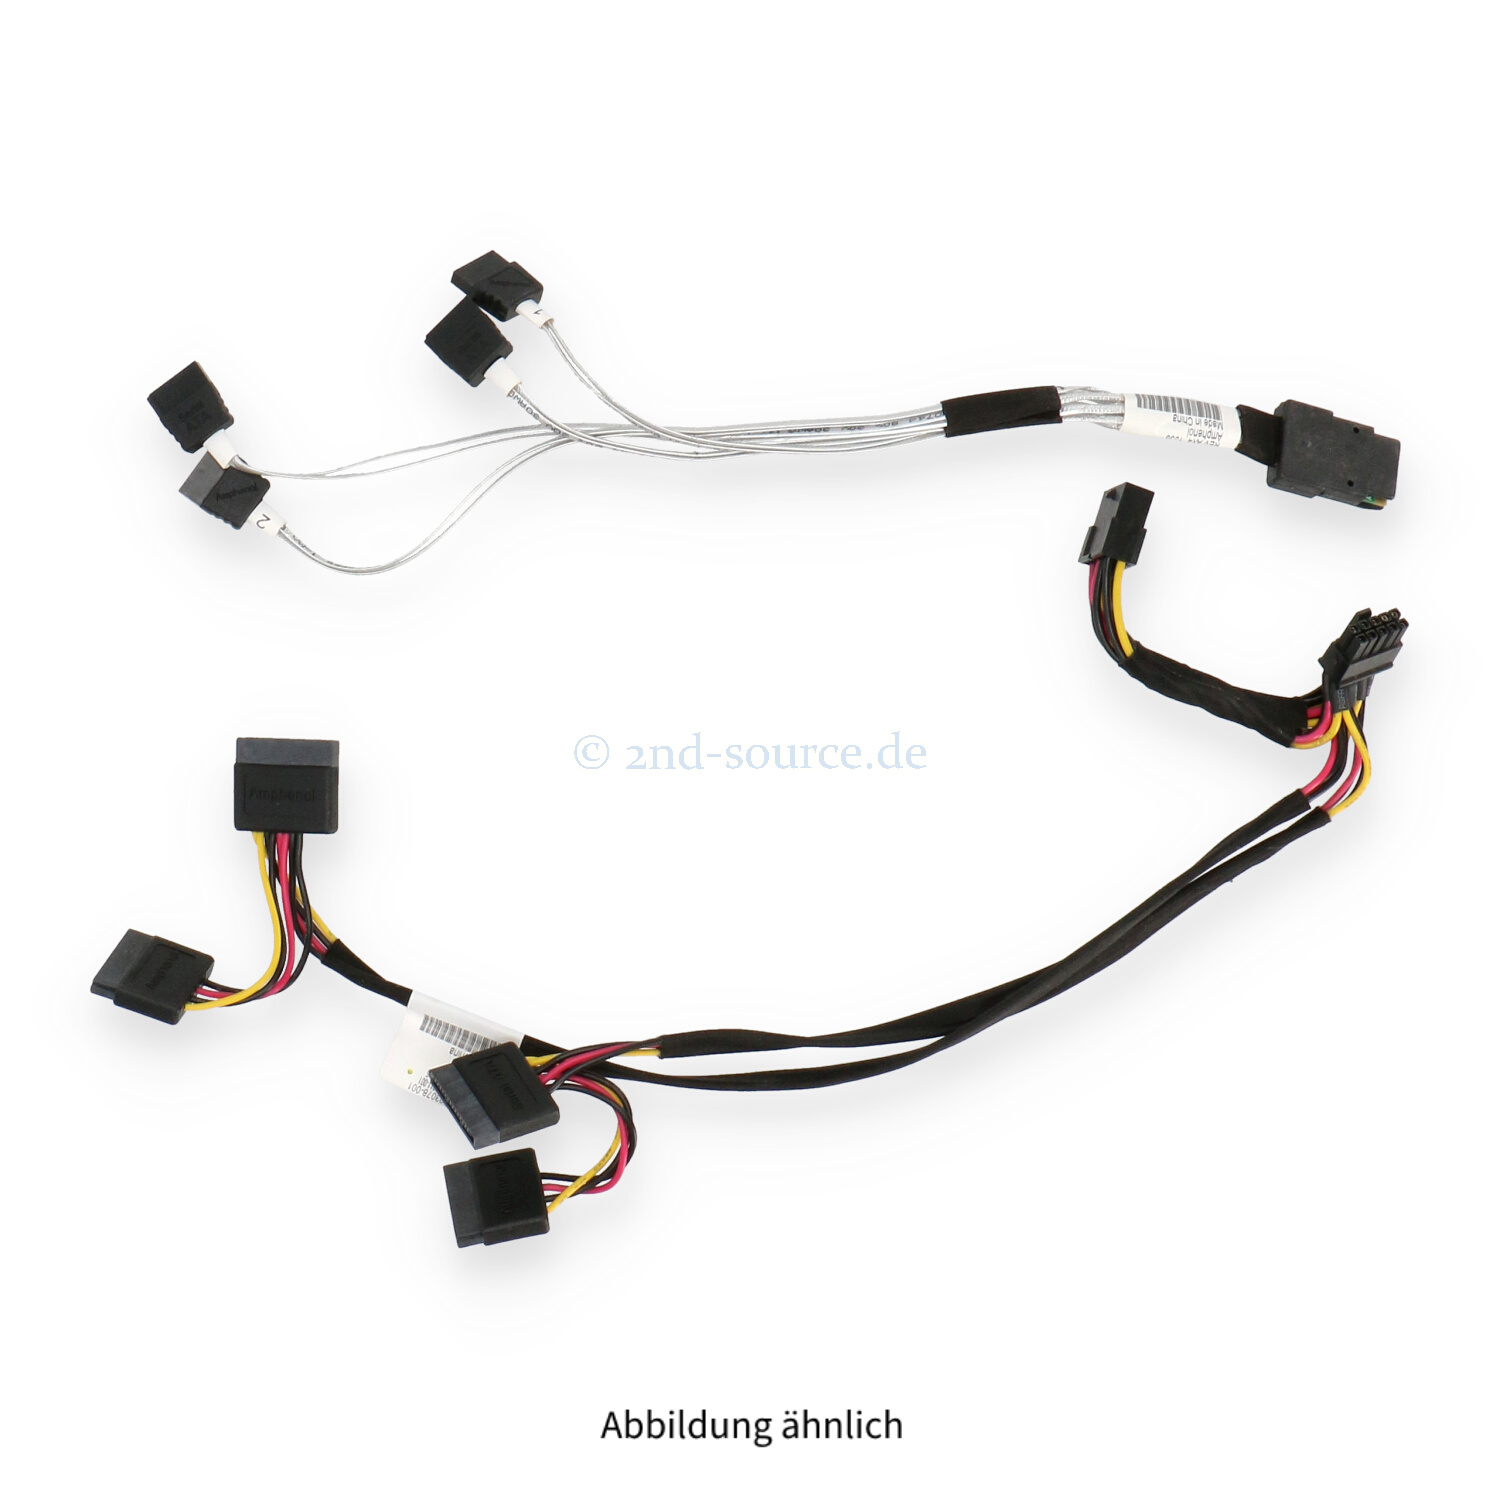 HPE SAS/SATA and Power Cable Kit DL360 G9 826011-001